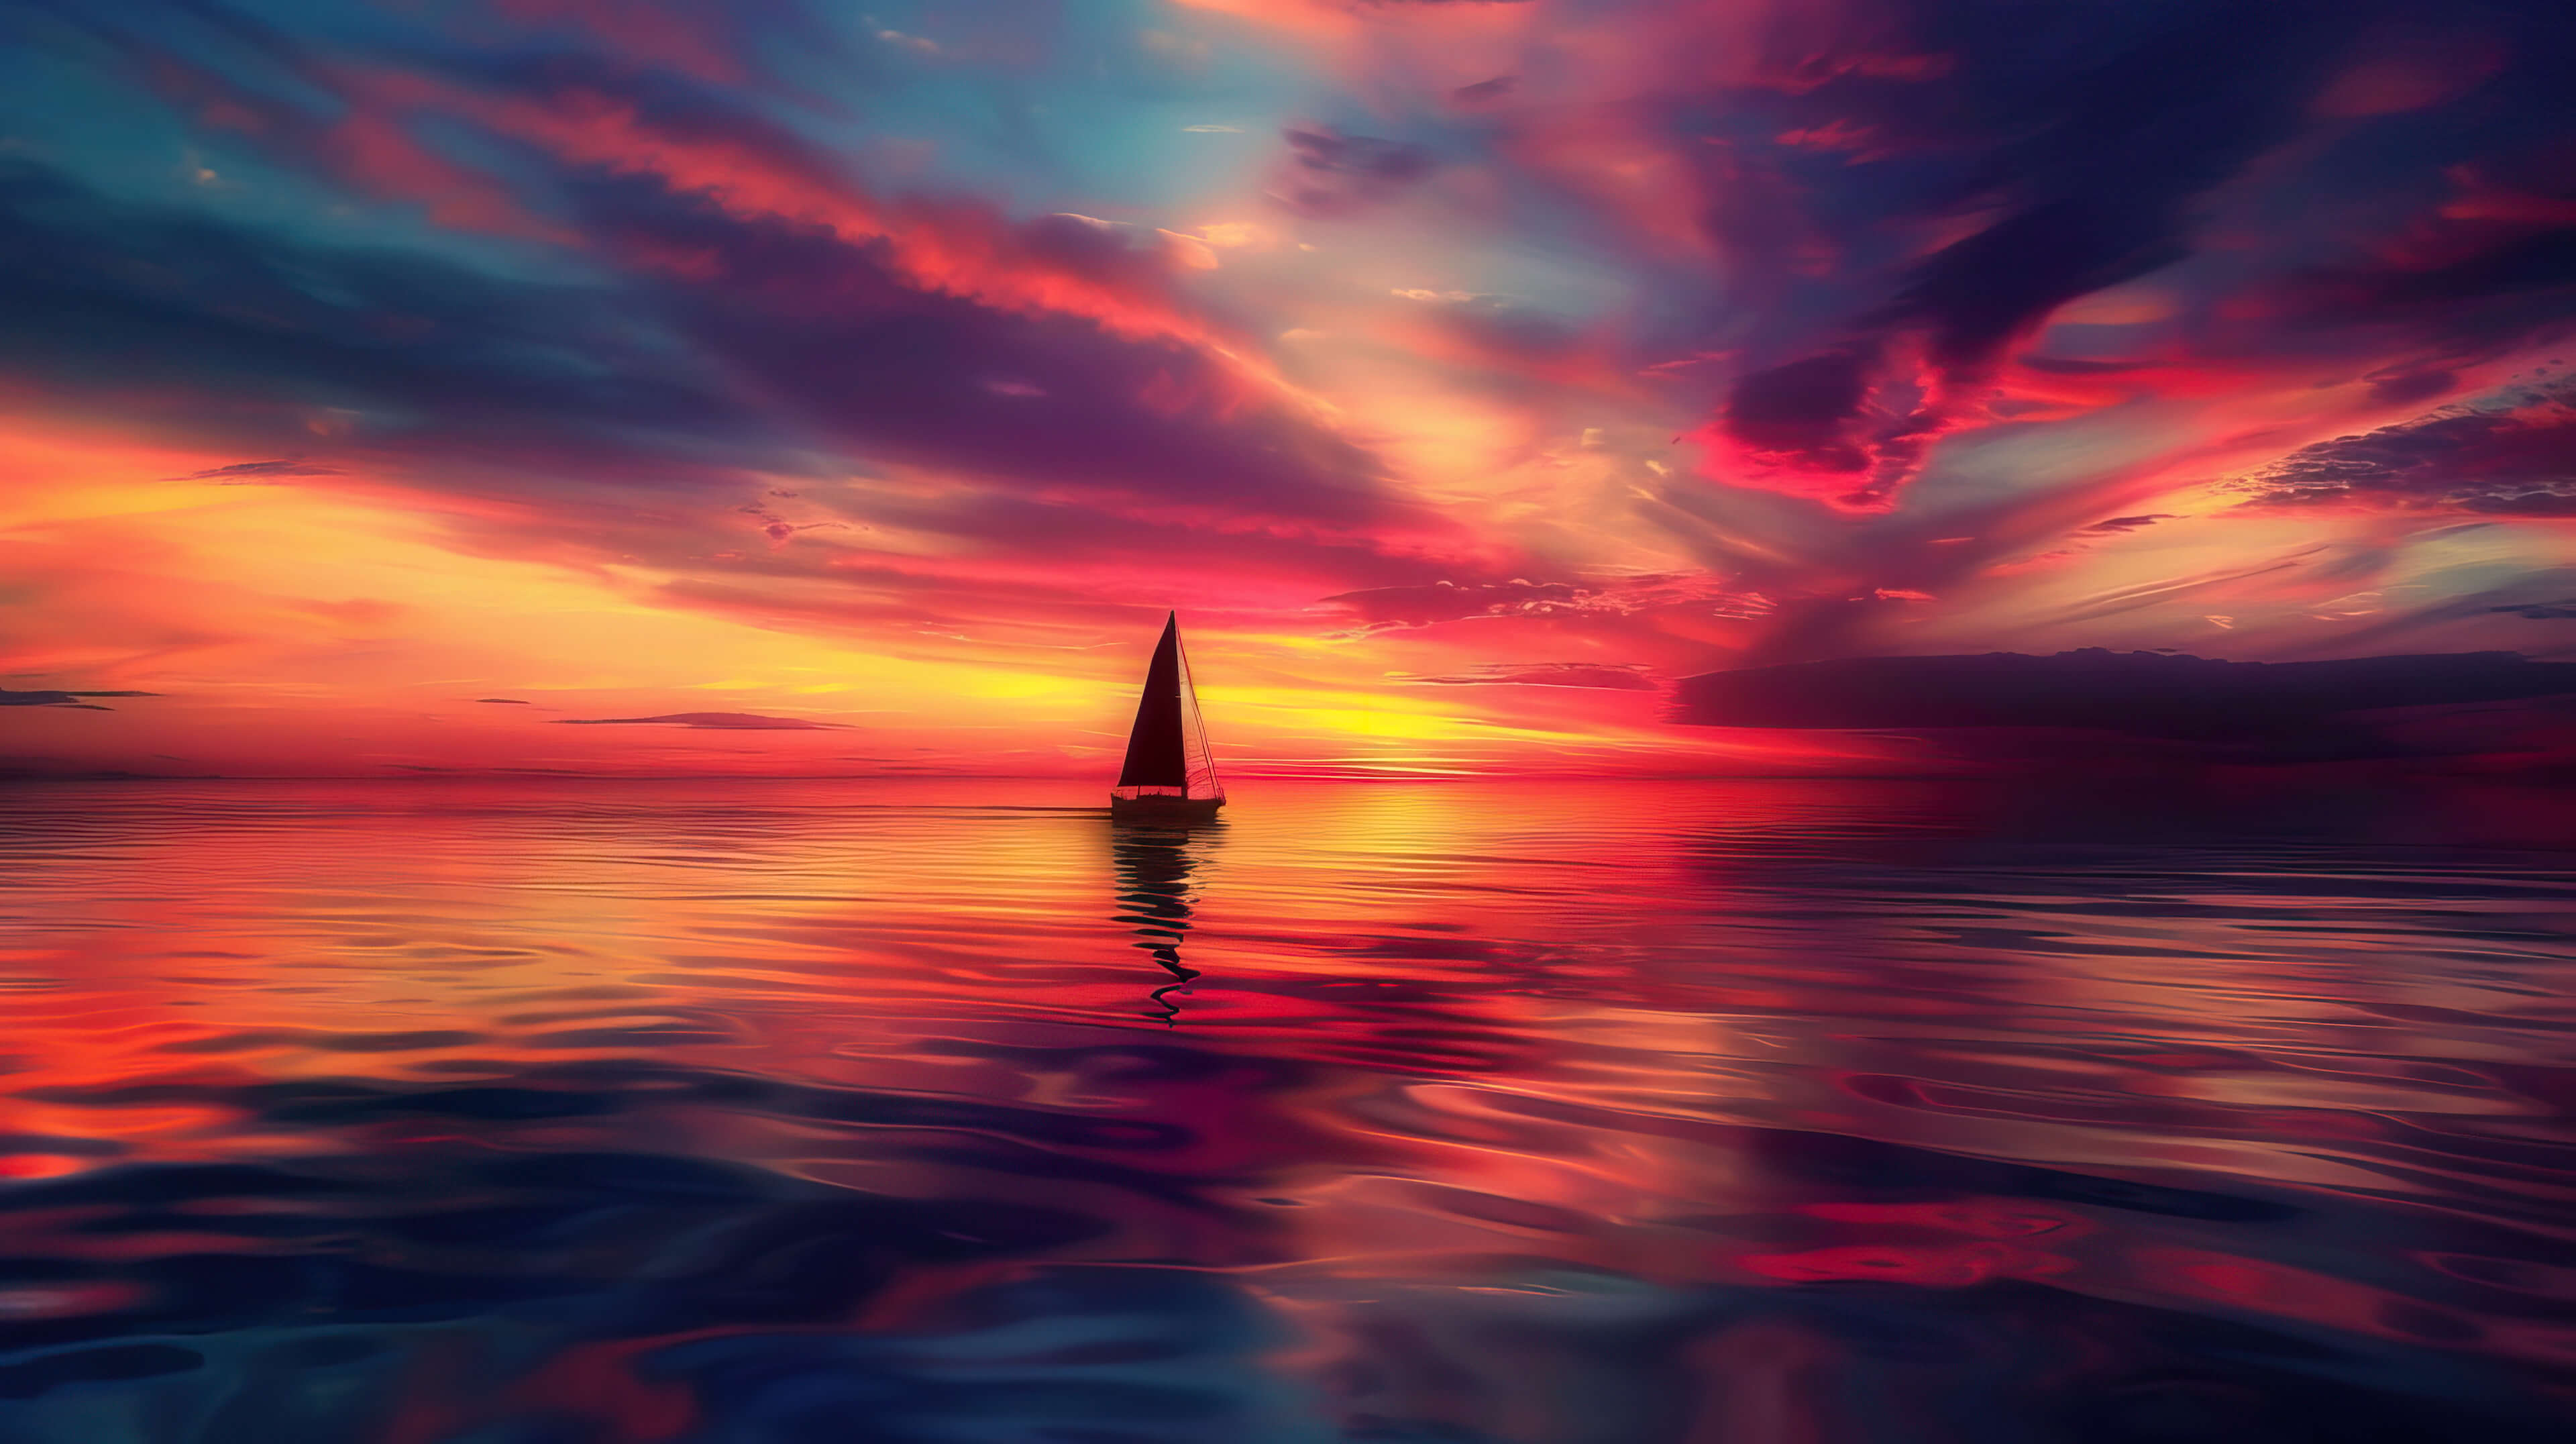 A dramatic sunset over the ocean, with a sailboat silhouetted against fiery orange and pink hues reflecting off the water